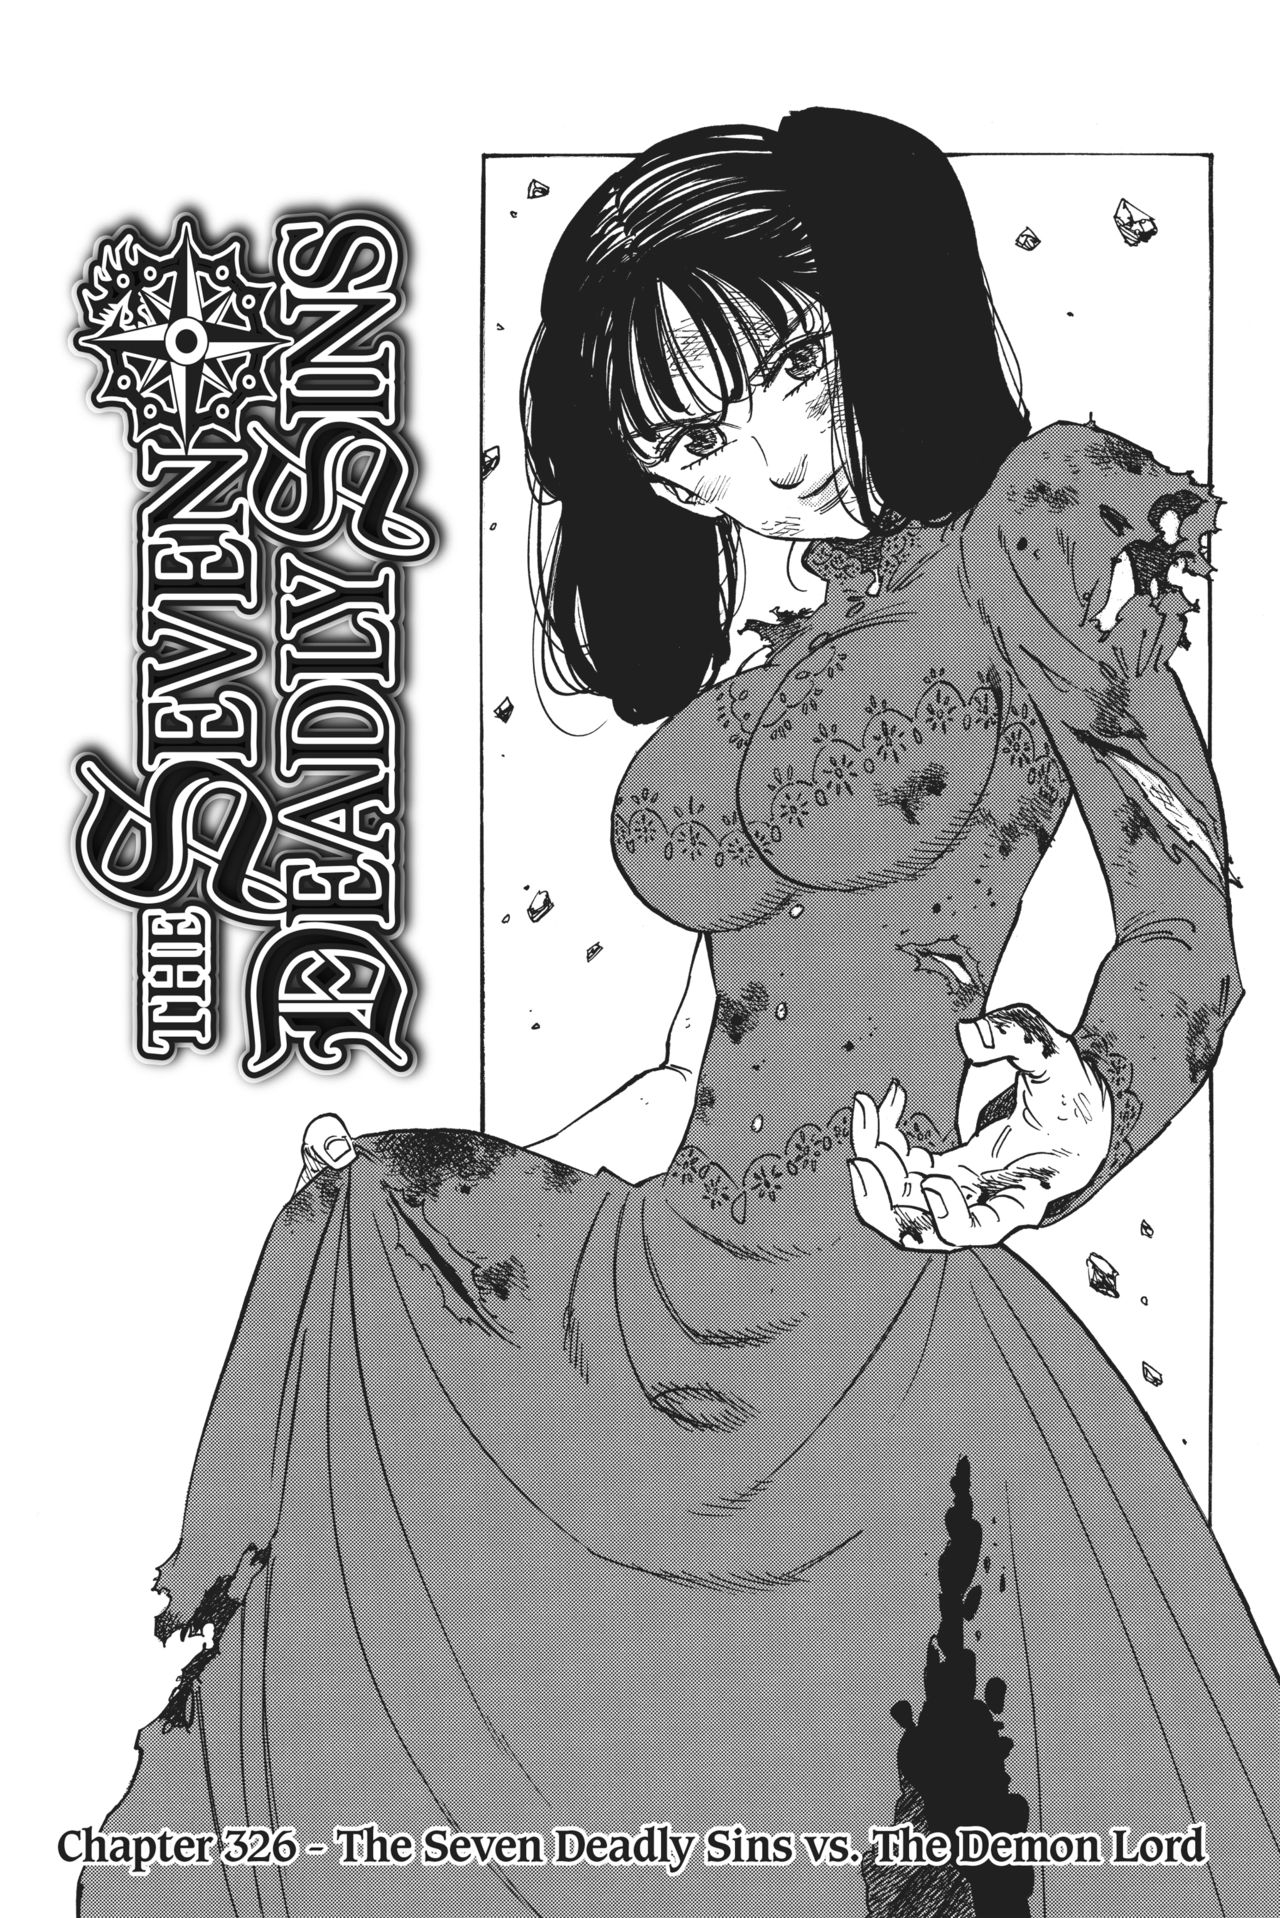 The Seven Deadly Sins (Covers & Chapter Title Cards) 257